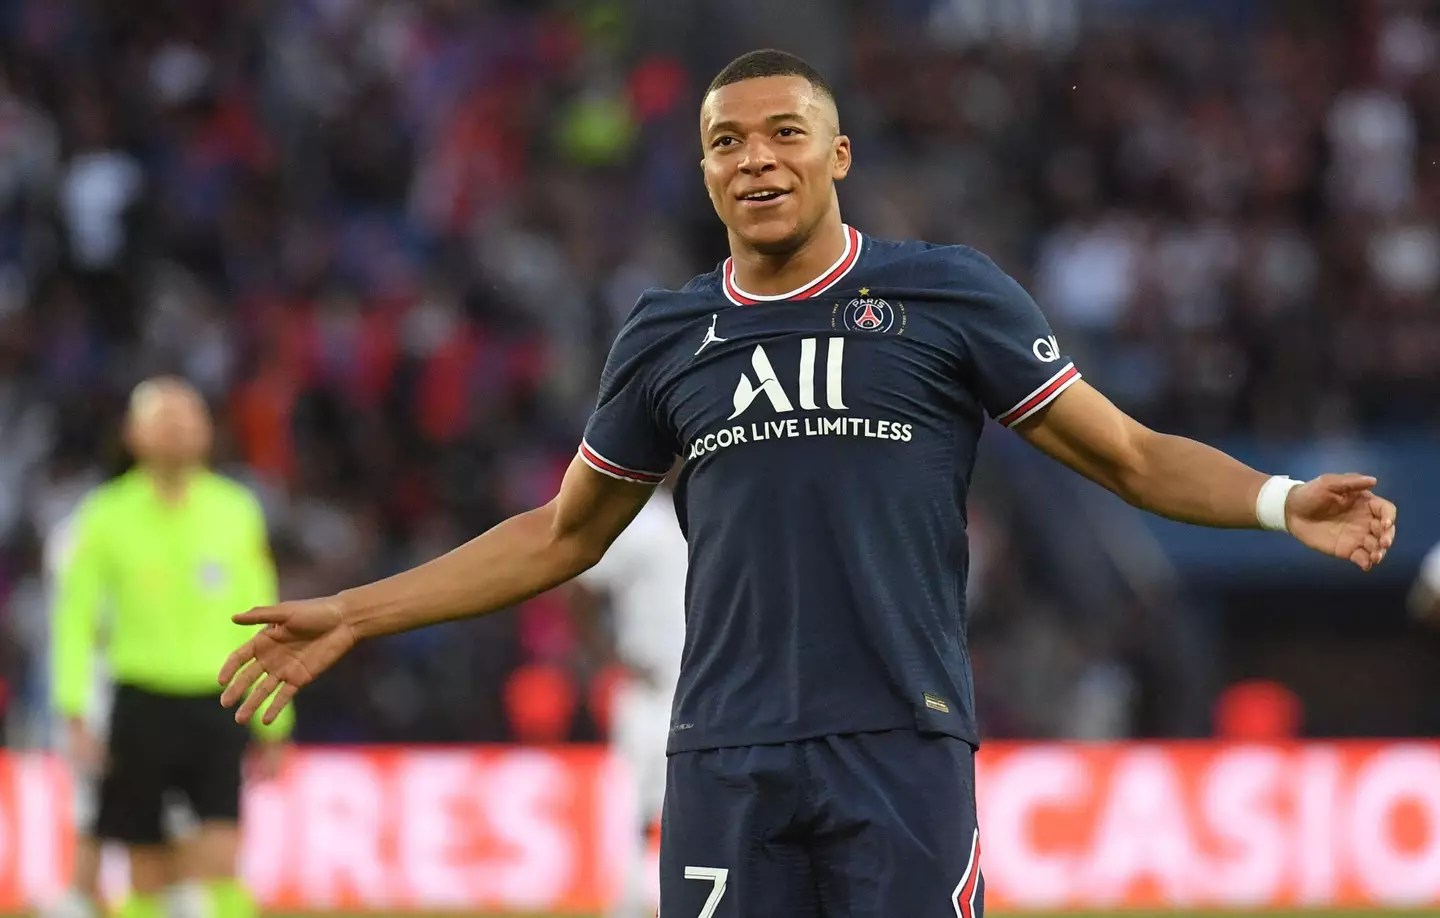 Kylian Mbappe is remaining at PSG with an eye watering contract